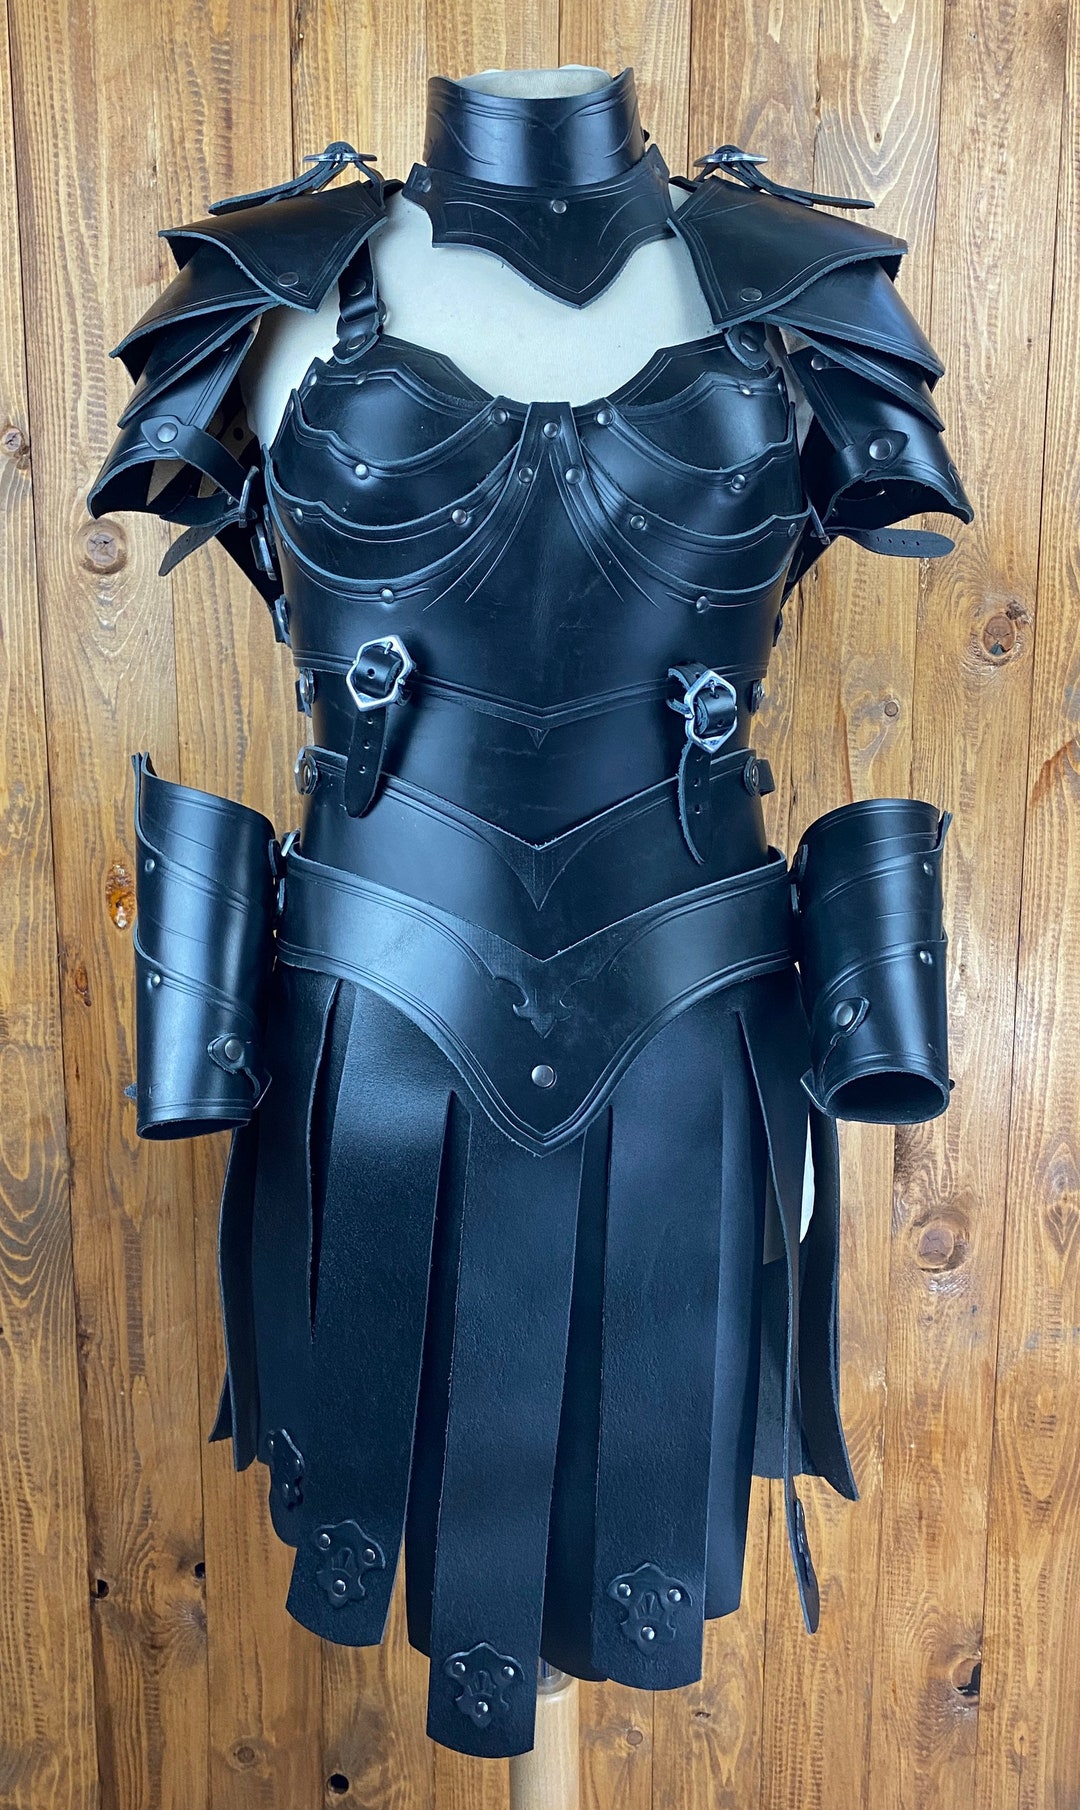 LILITH Leather Female Armor Set Perfect for Role Play Cosplay - Etsy